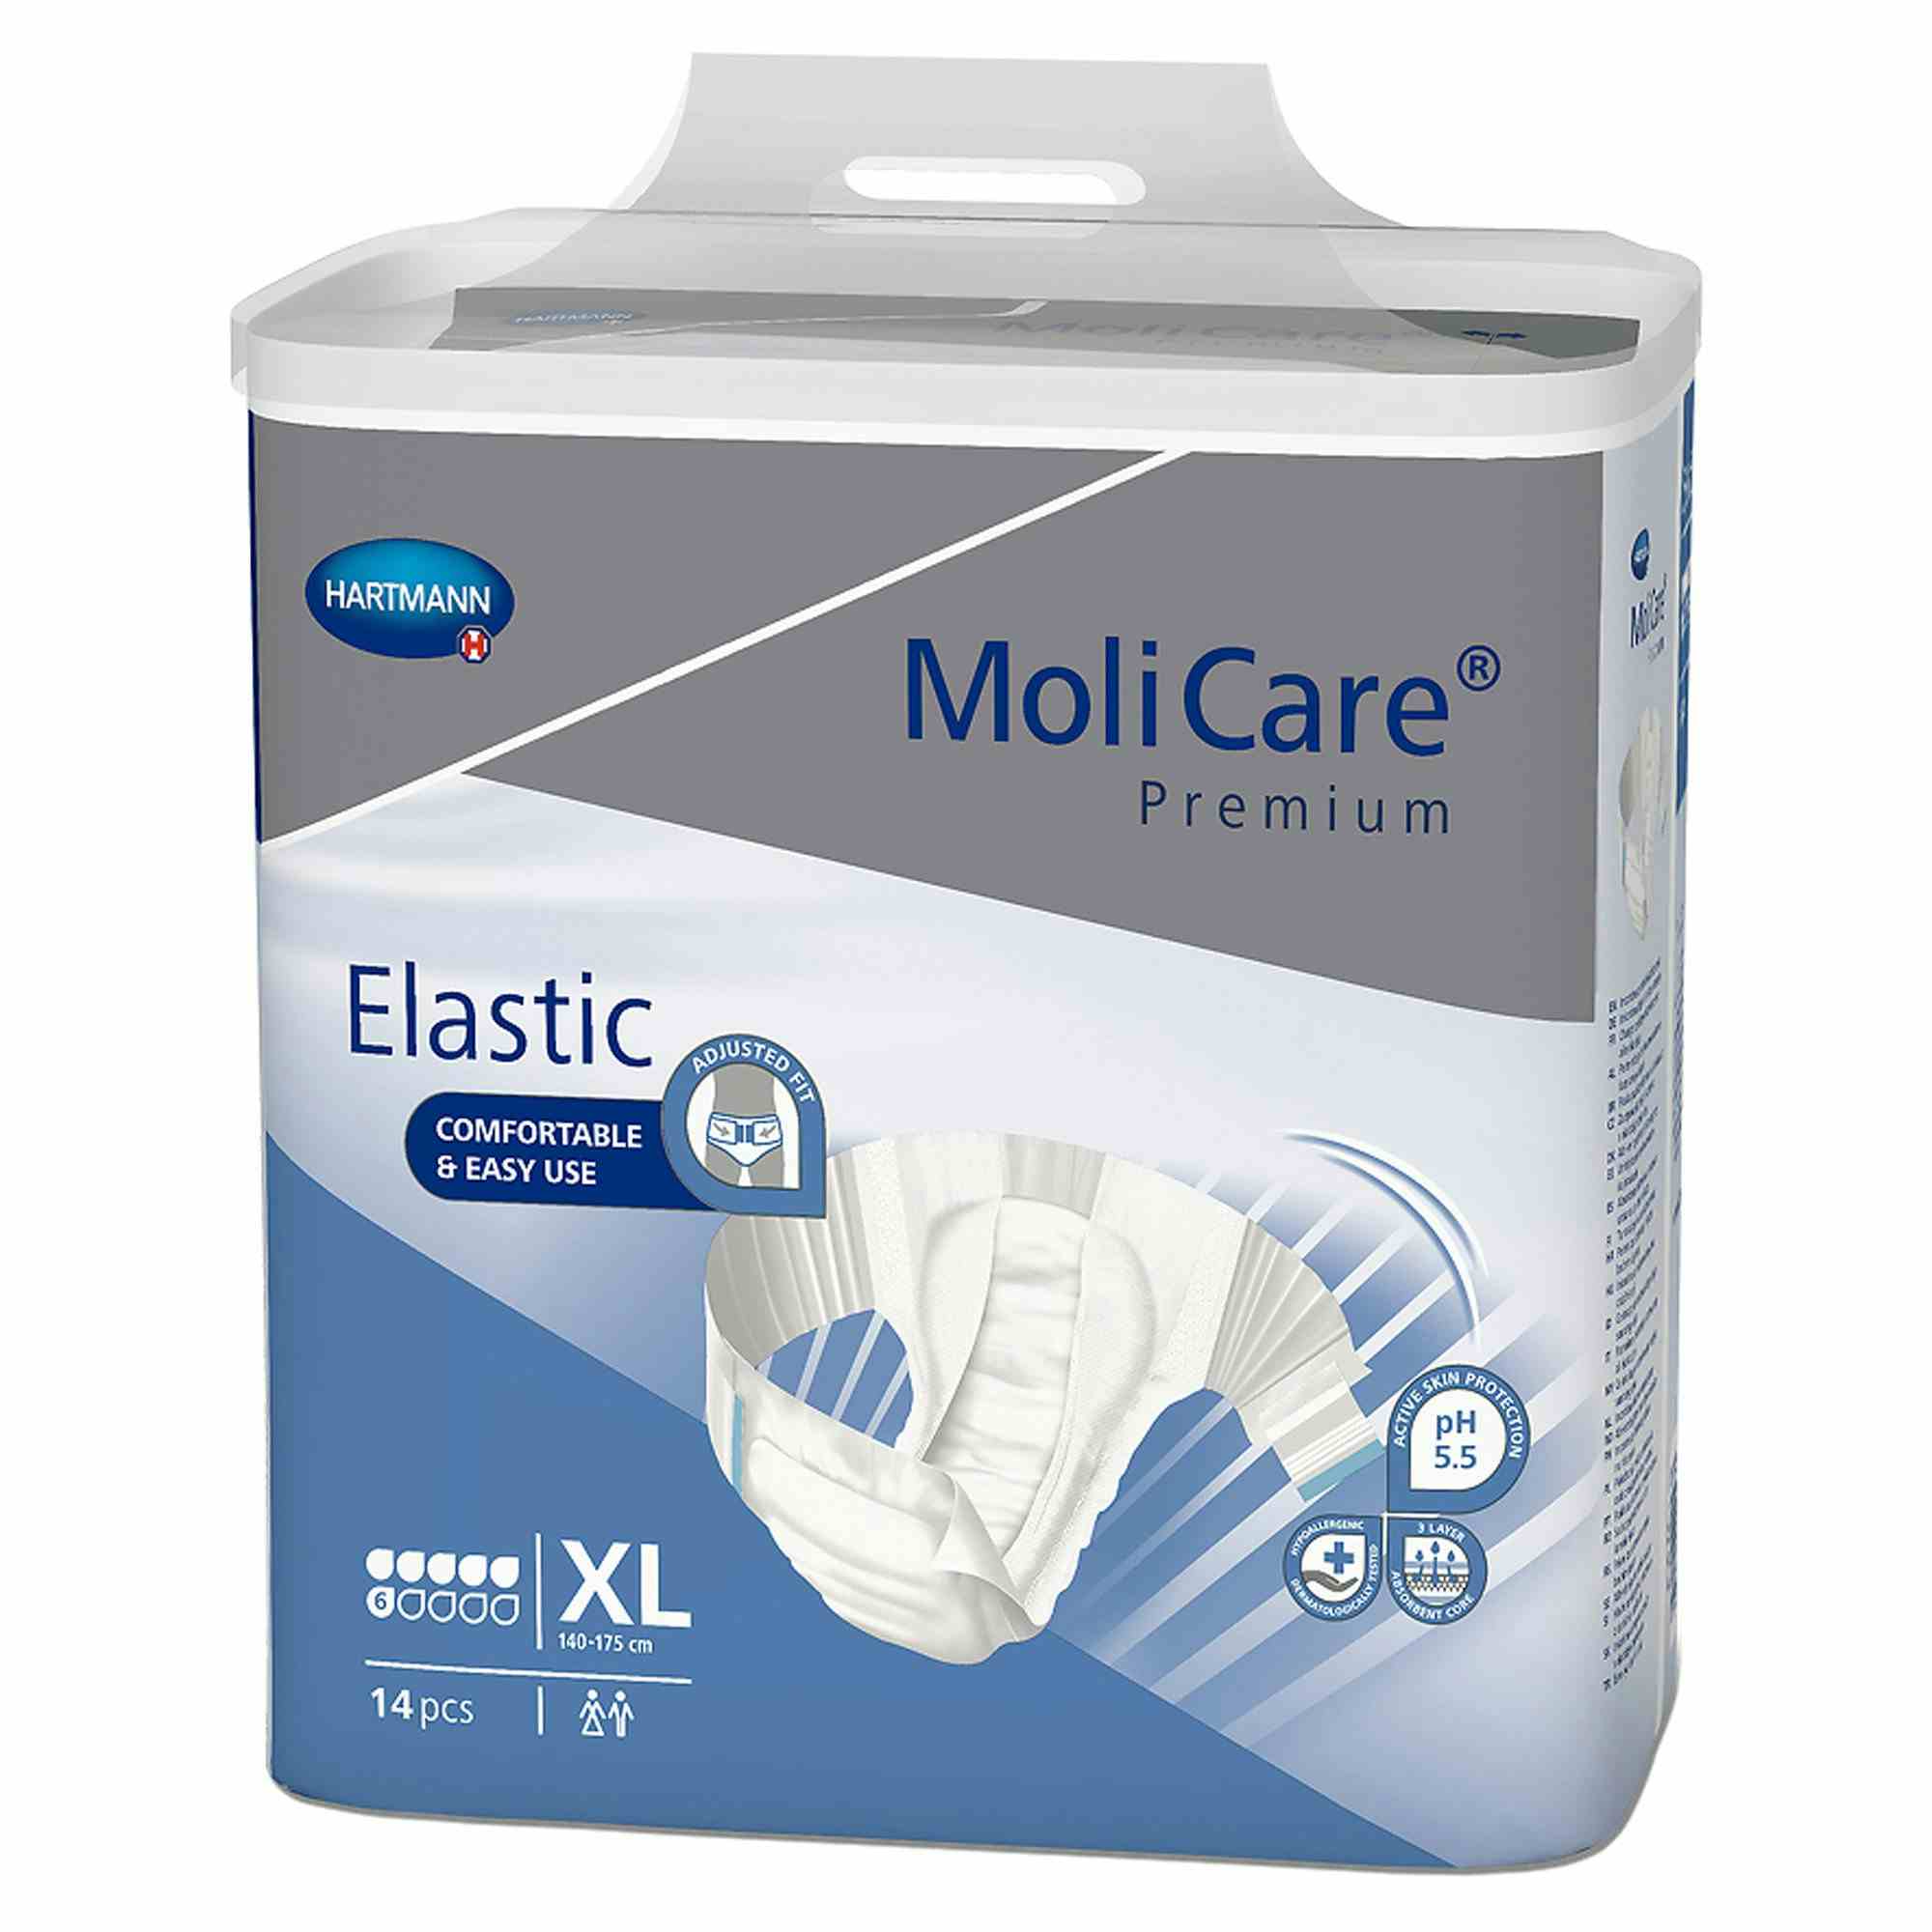 MoliCare Premium Elastic 6D Disposable Brief Adult Diapers with Tabs, Moderate Absorbency, 165274, X-Large (55-69") - Case of 56